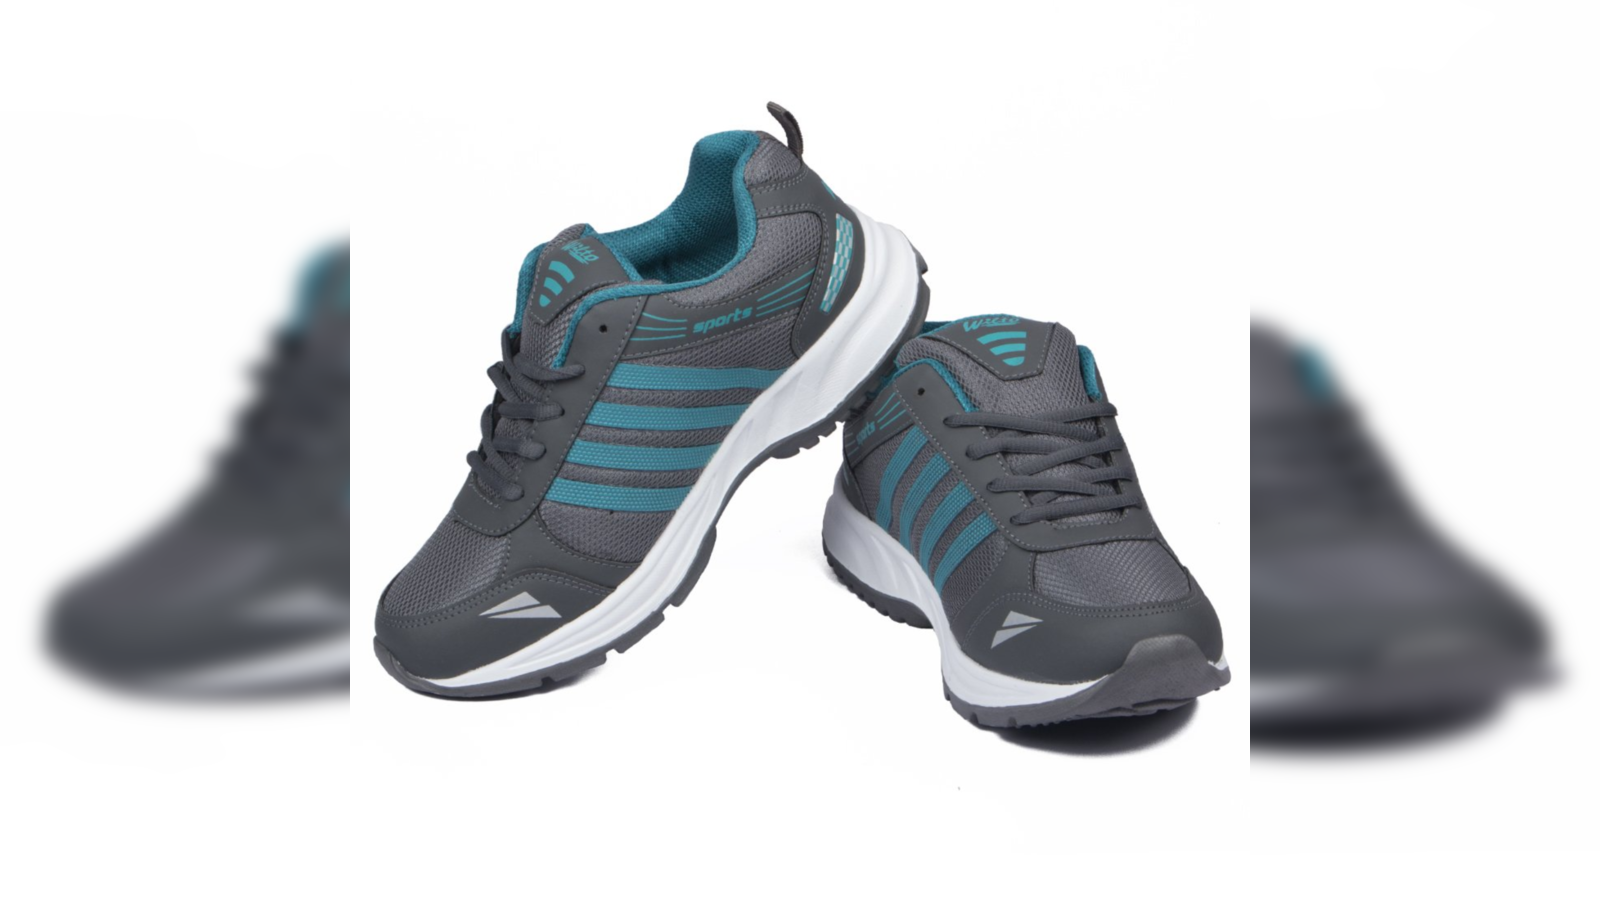 Running Shoes for Men: Check Out 5 Best Running Shoes for Men in